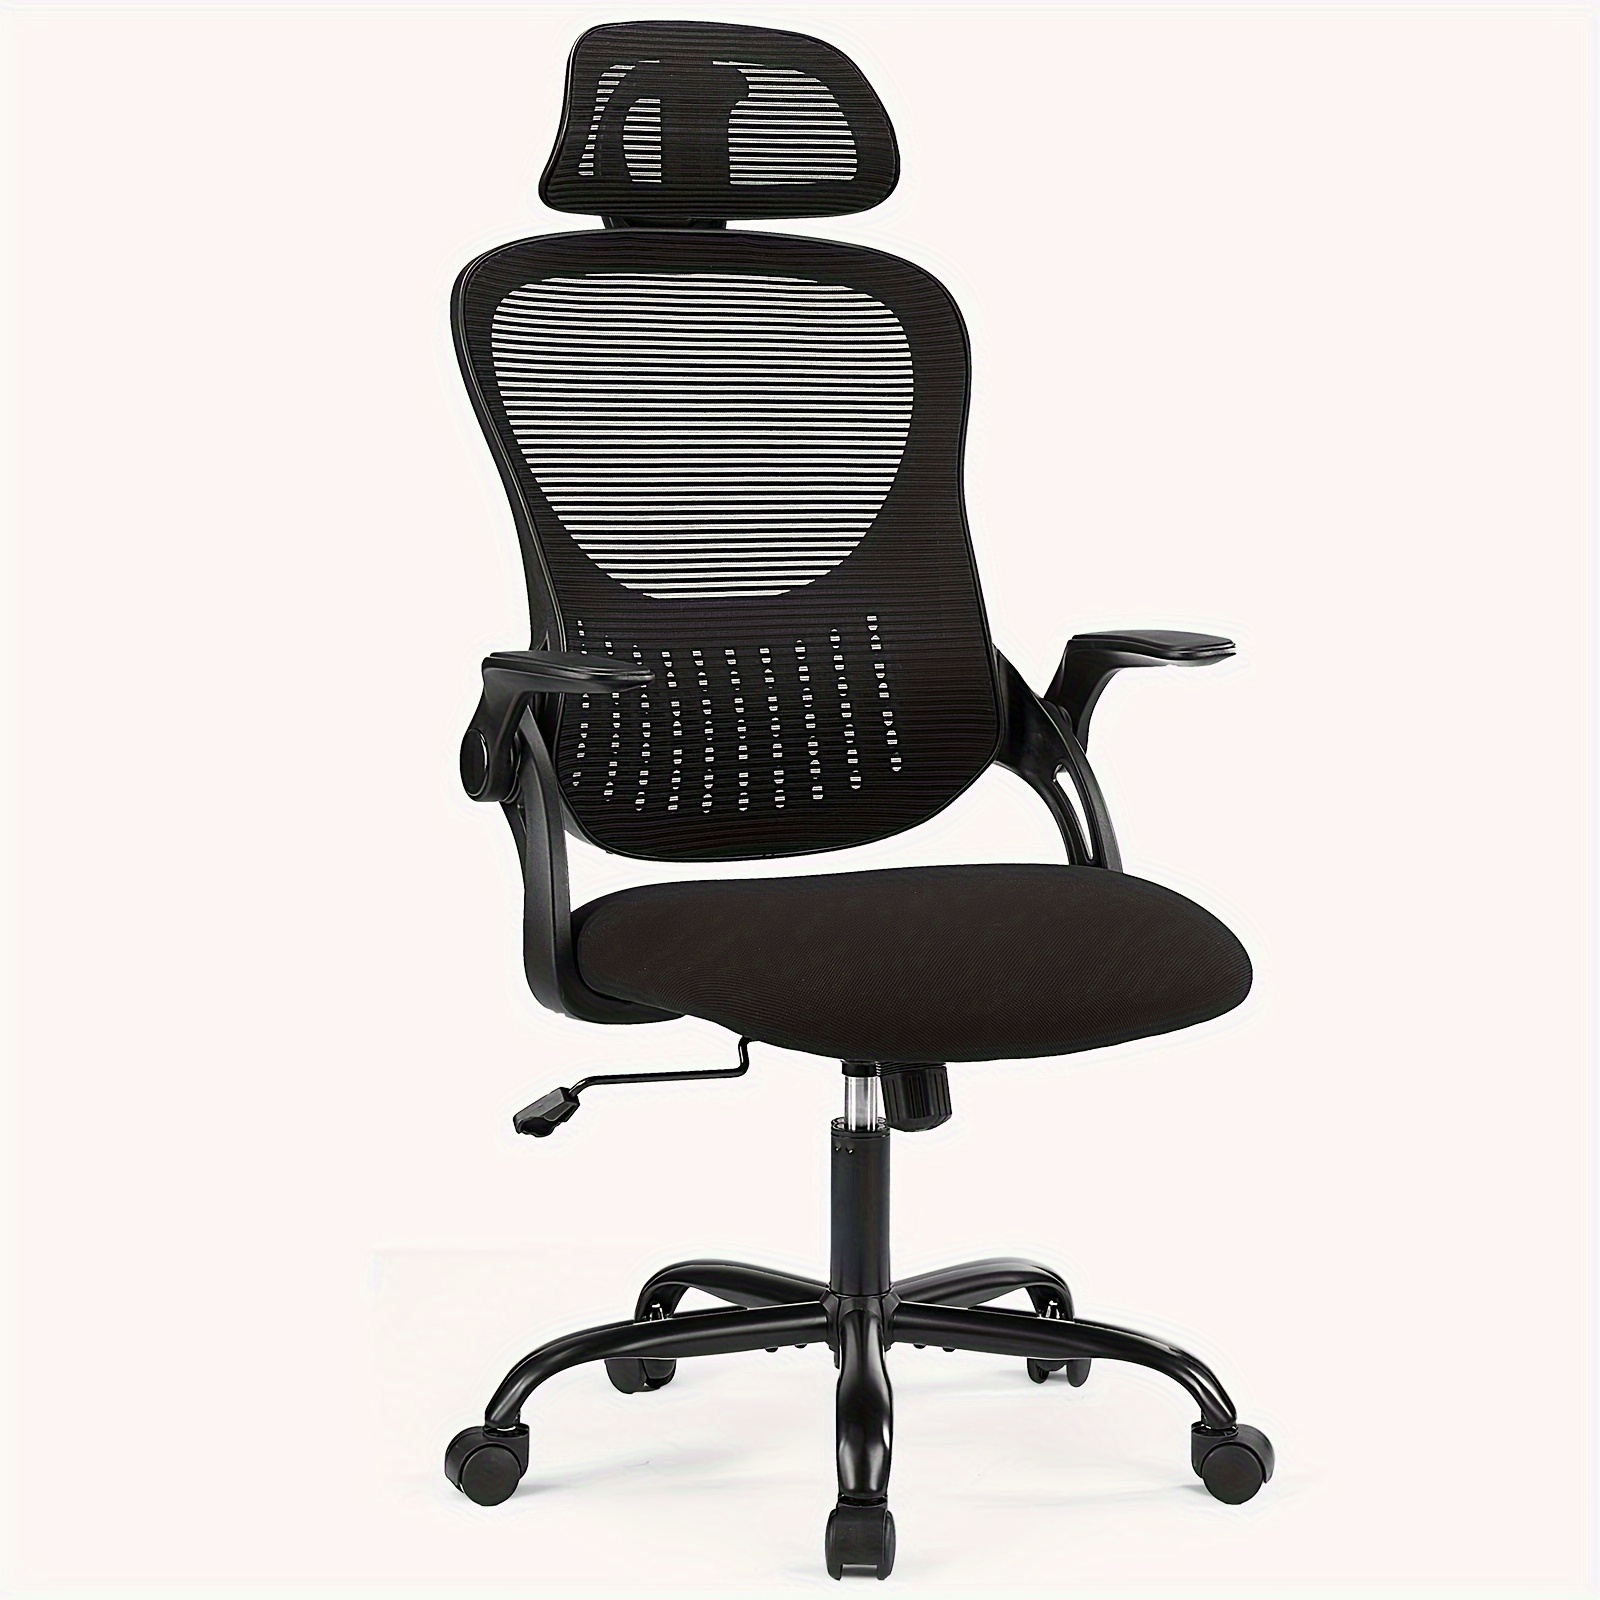 

Office Computer Desk Chair, Ergonomic High-back Mesh Rolling Work Chairs With Wheels And Adjustable Headrests, Comfortable Lumbar Support, Comfy Flip-up Arms For Home, Bedroom, Study